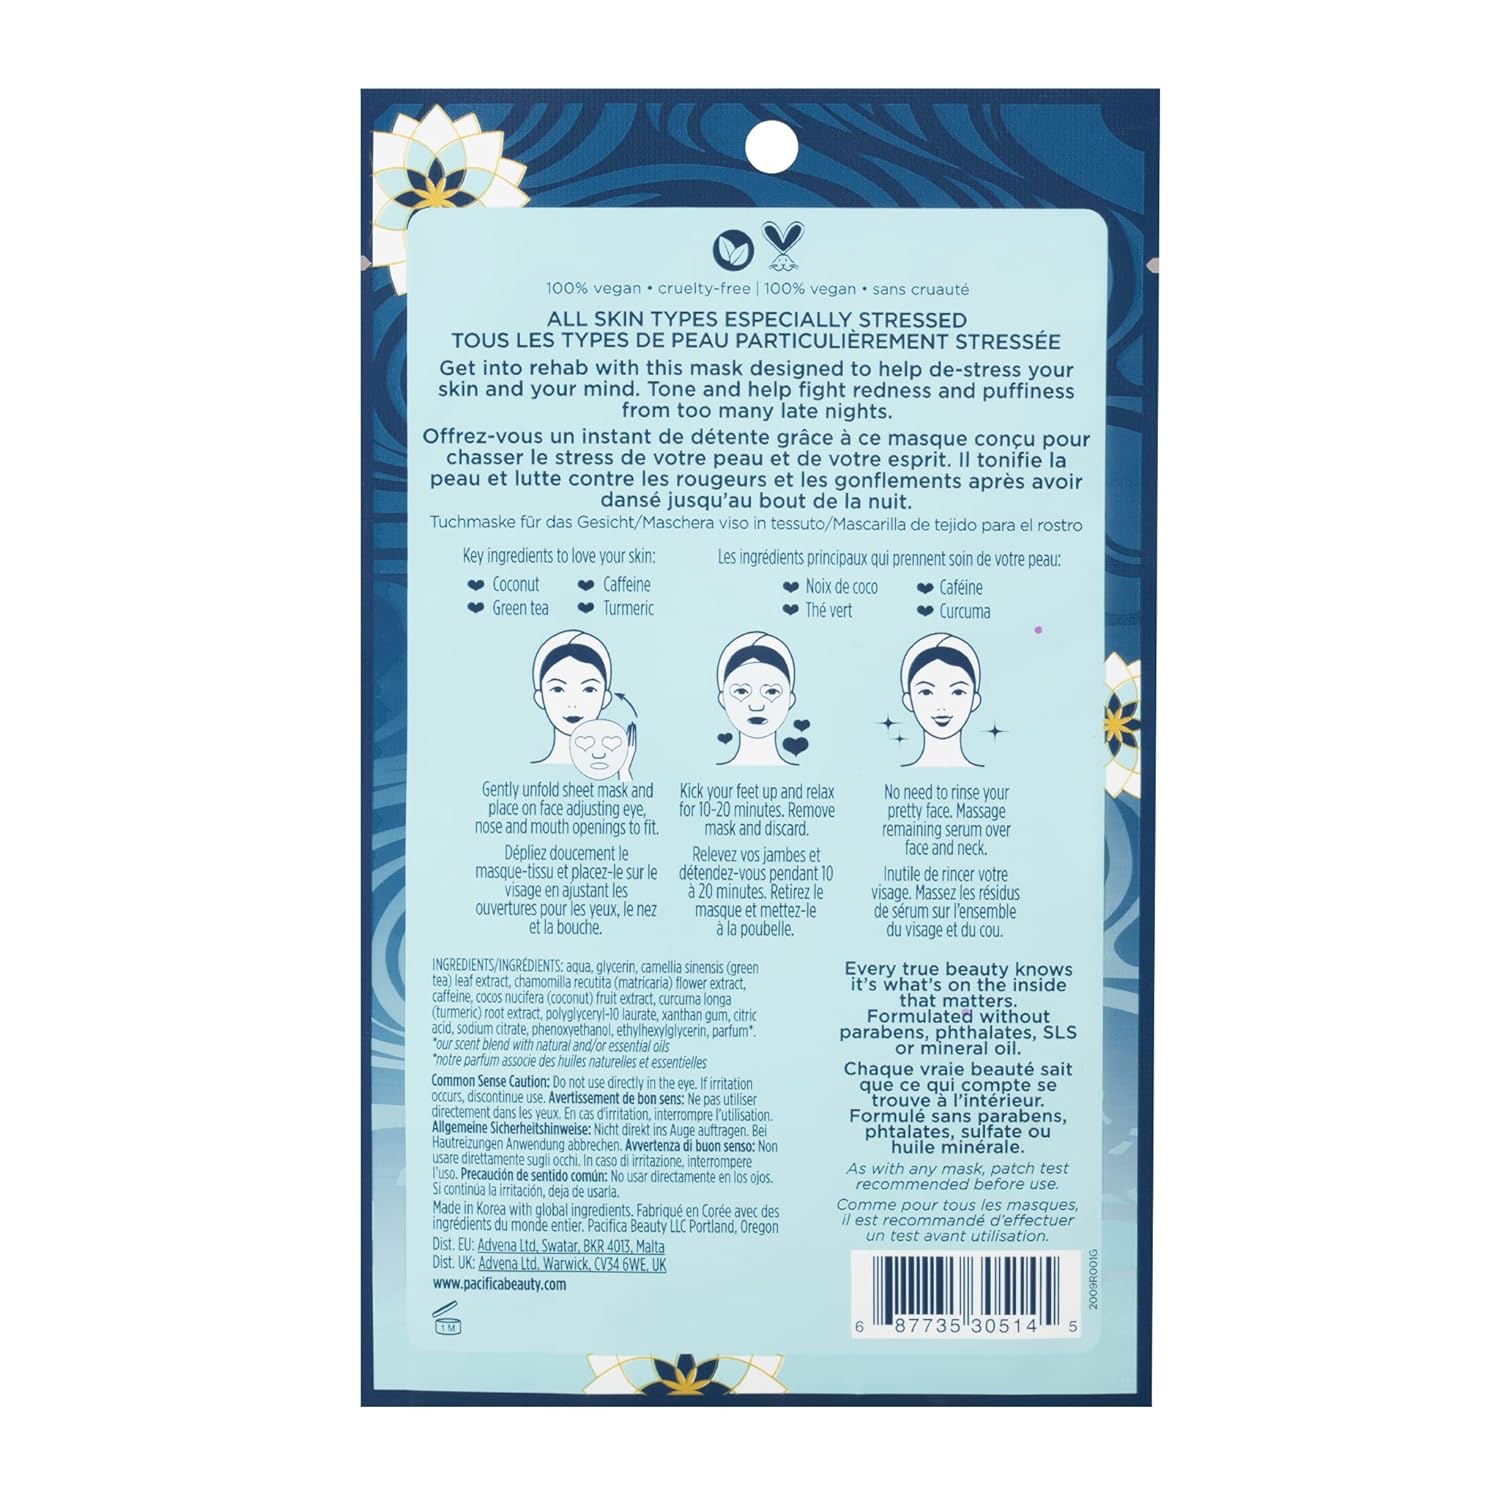 Pacifica Beauty, Stress Rehab Coconut & Caffeine Face Mask, Sheet Mask, De-Stress, Reduce Puffiness & Redness, For All Skin Types, Green Tea, Vegan : Beauty & Personal Care